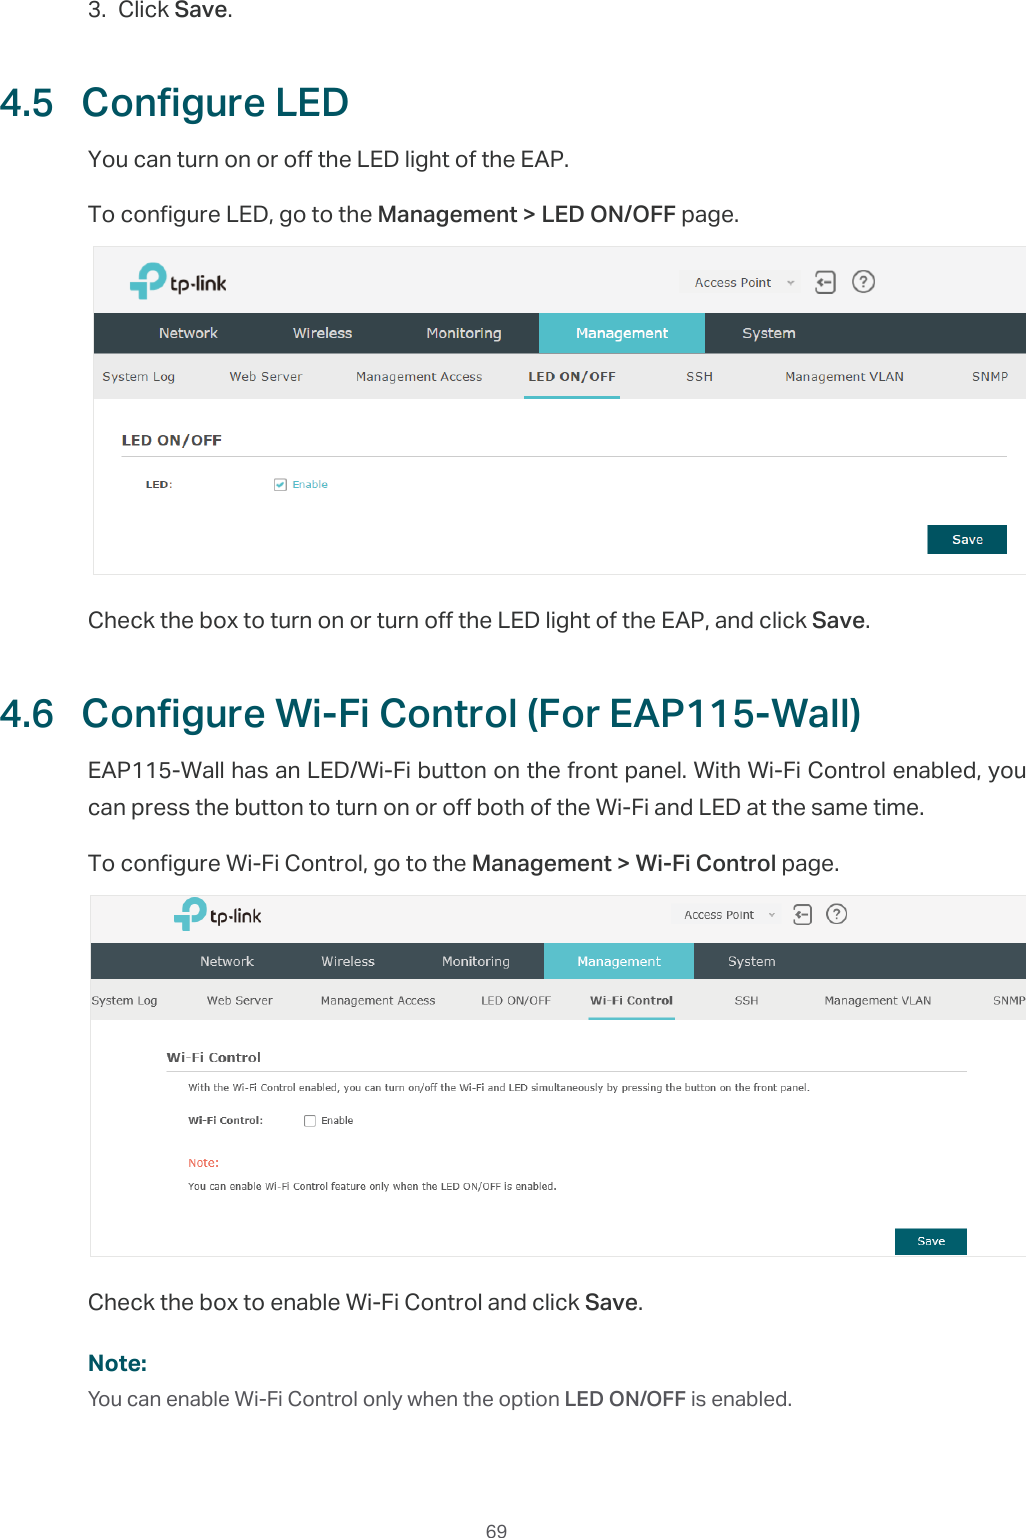  693. Click Save.4.5  Configure LEDYou can turn on or off the LED light of the EAP.To configure LED, go to the Management &gt; LED ON/OFF page.Check the box to turn on or turn off the LED light of the EAP, and click Save.4.6  Configure Wi-Fi Control (For EAP115-Wall)EAP115-Wall has an LED/Wi-Fi button on the front panel. With Wi-Fi Control enabled, you can press the button to turn on or off both of the Wi-Fi and LED at the same time.To configure Wi-Fi Control, go to the Management &gt; Wi-Fi Control page.Check the box to enable Wi-Fi Control and click Save.Note:You can enable Wi-Fi Control only when the option LED ON/OFF is enabled.